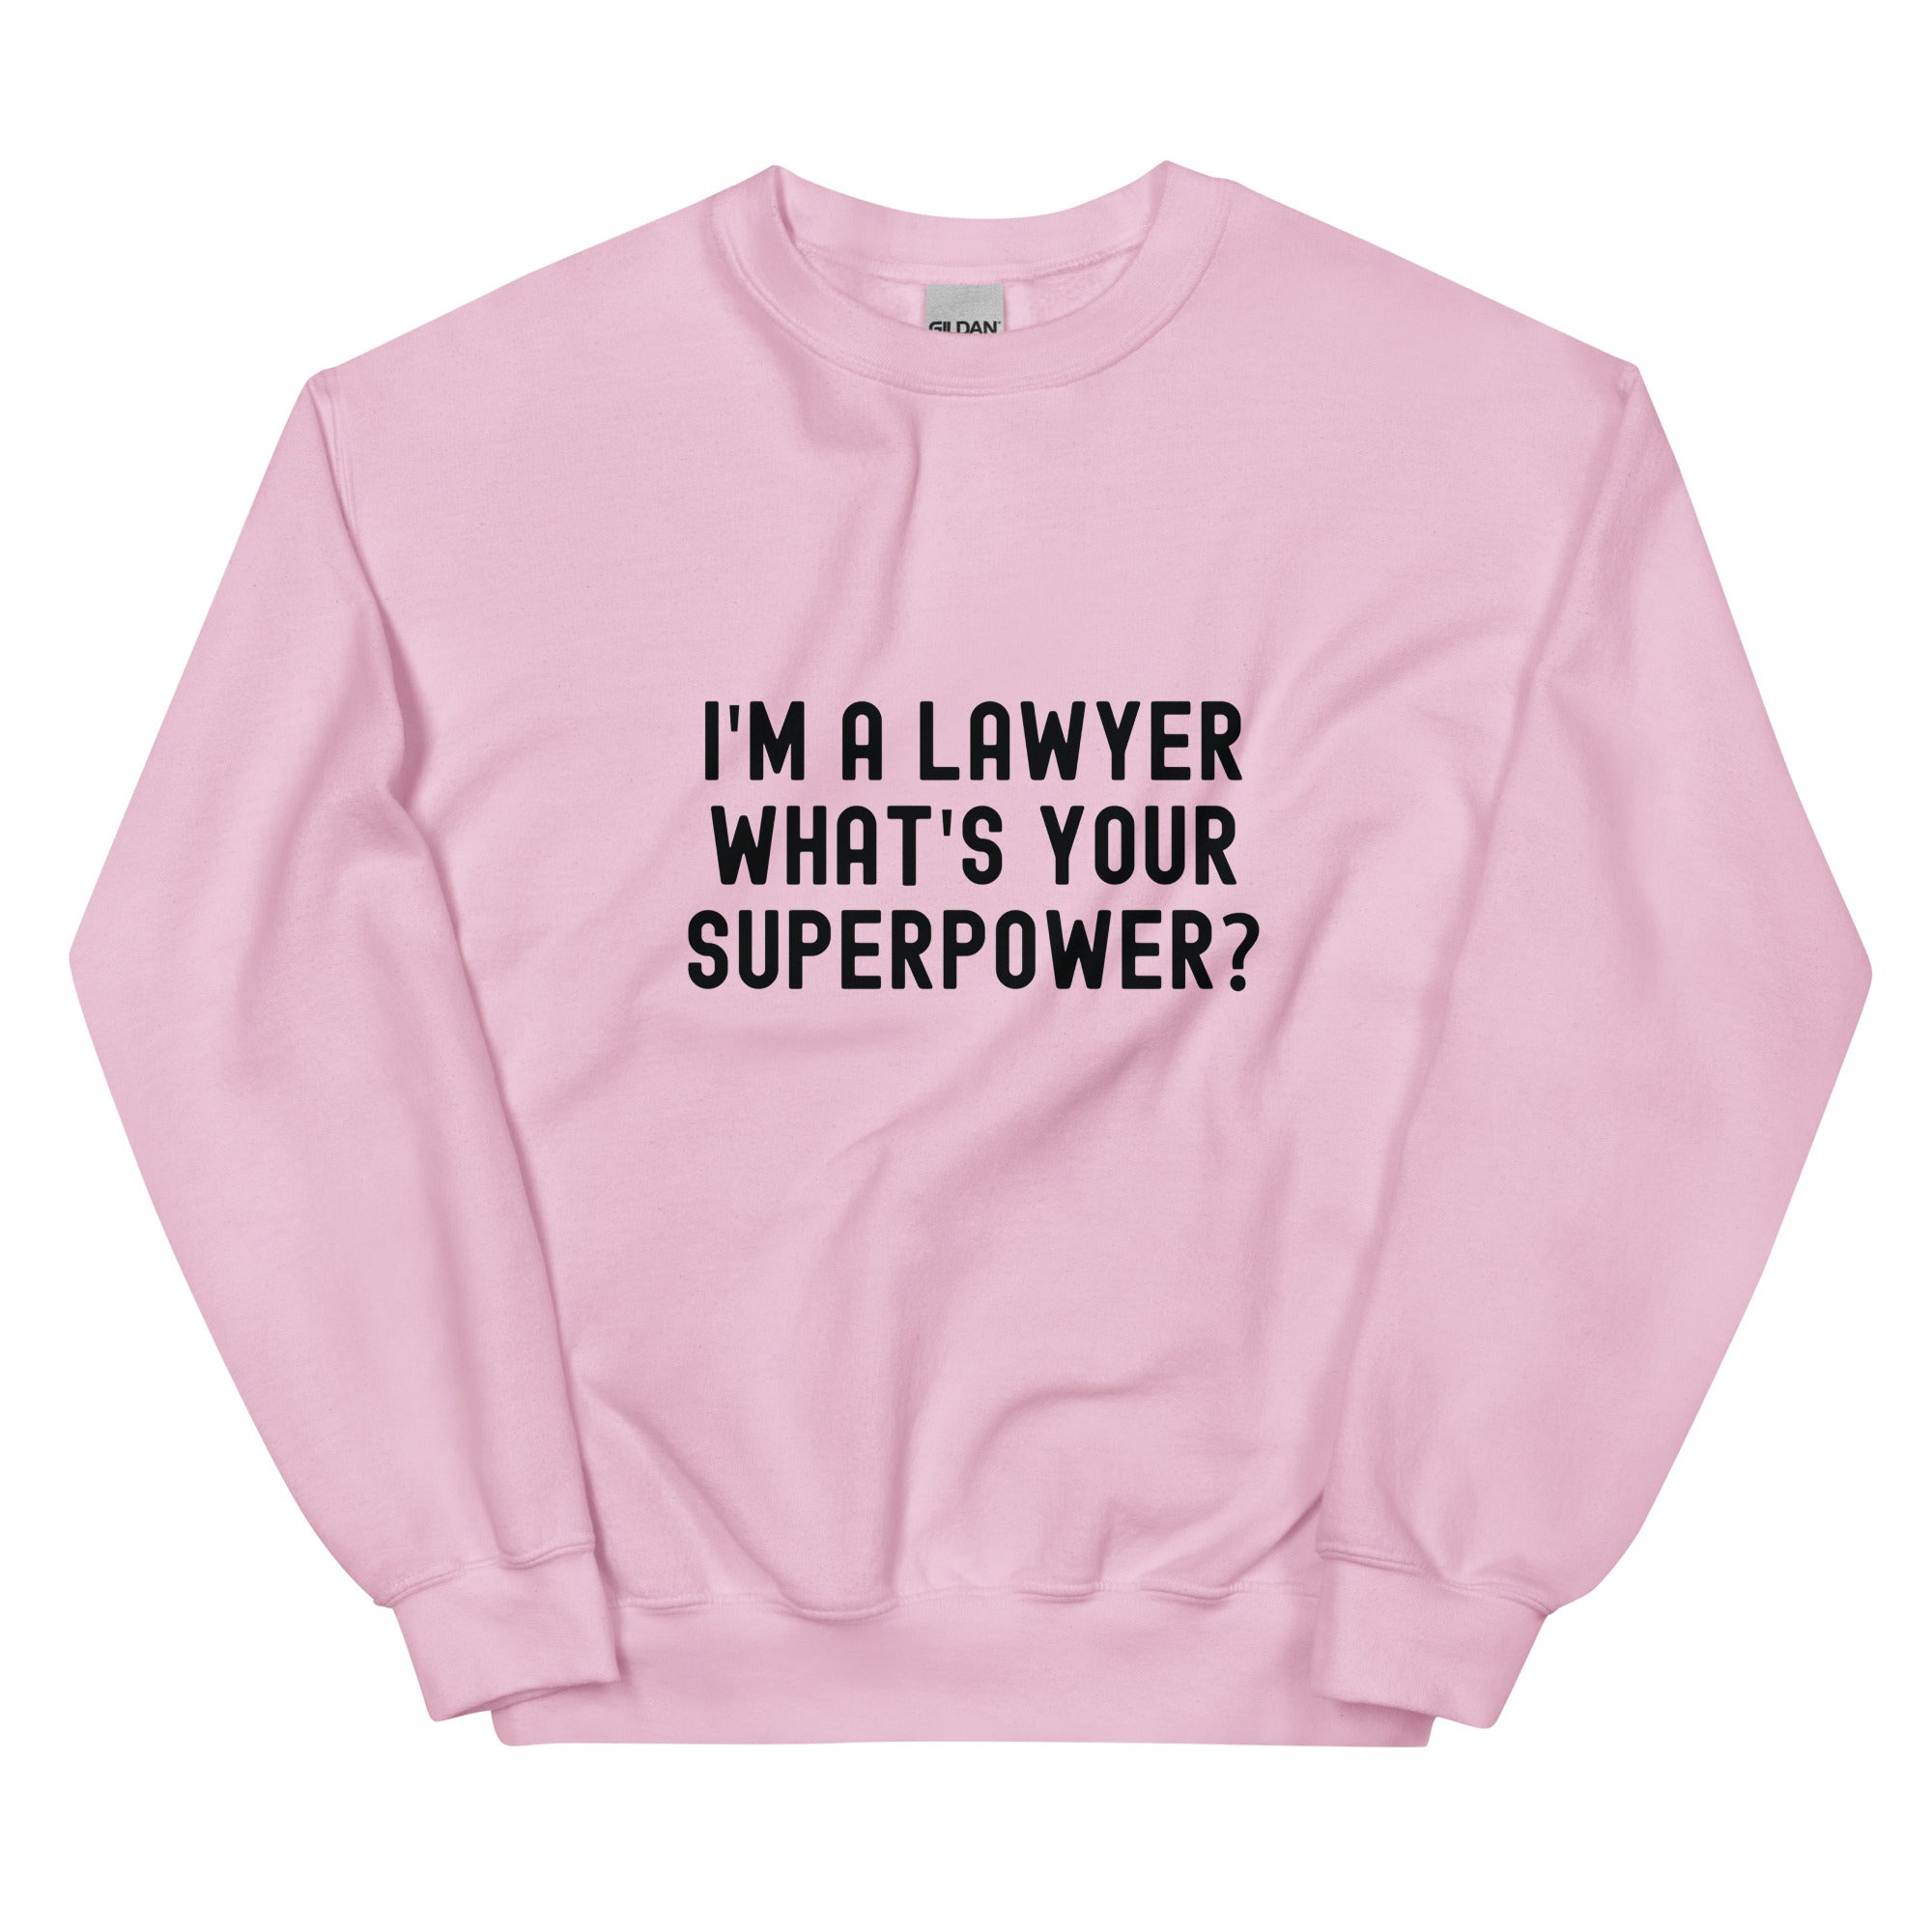 Unisex Sweatshirt | I'm a lawyer, what's your superpower?